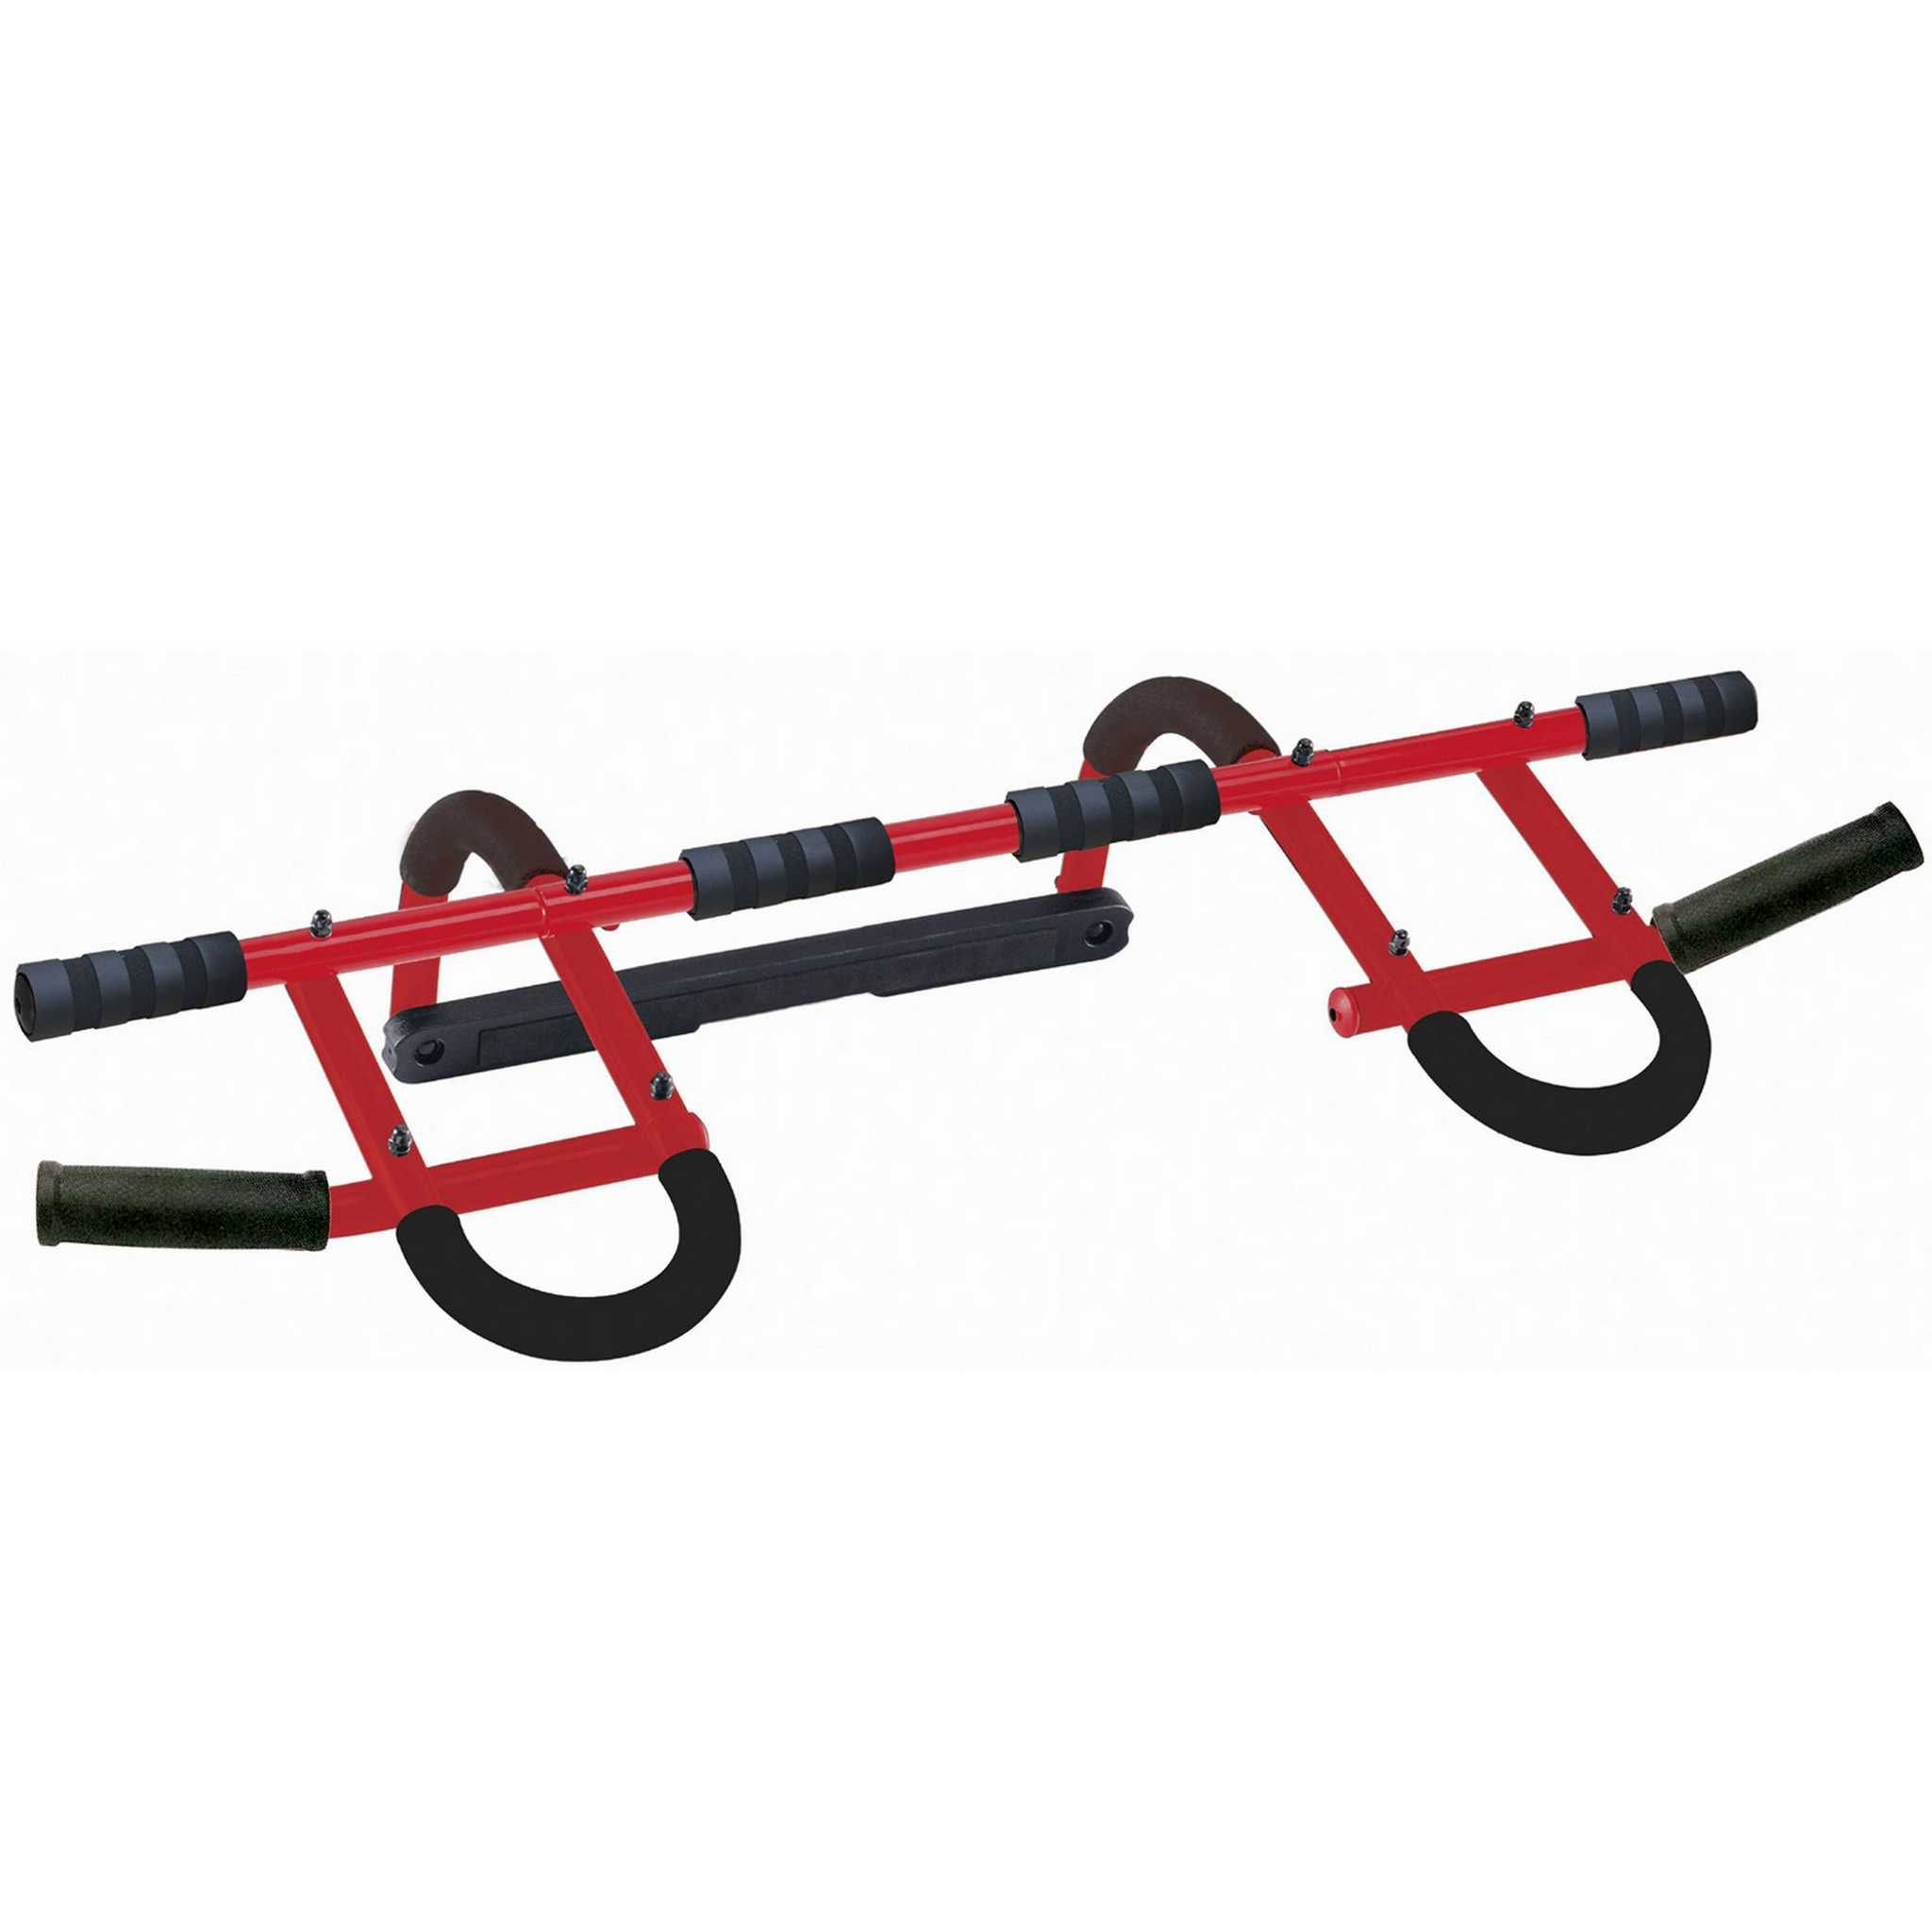 Wall-Mounted Pull-Up Bar, Heavy-Duty Steel, Home or Commercial Use